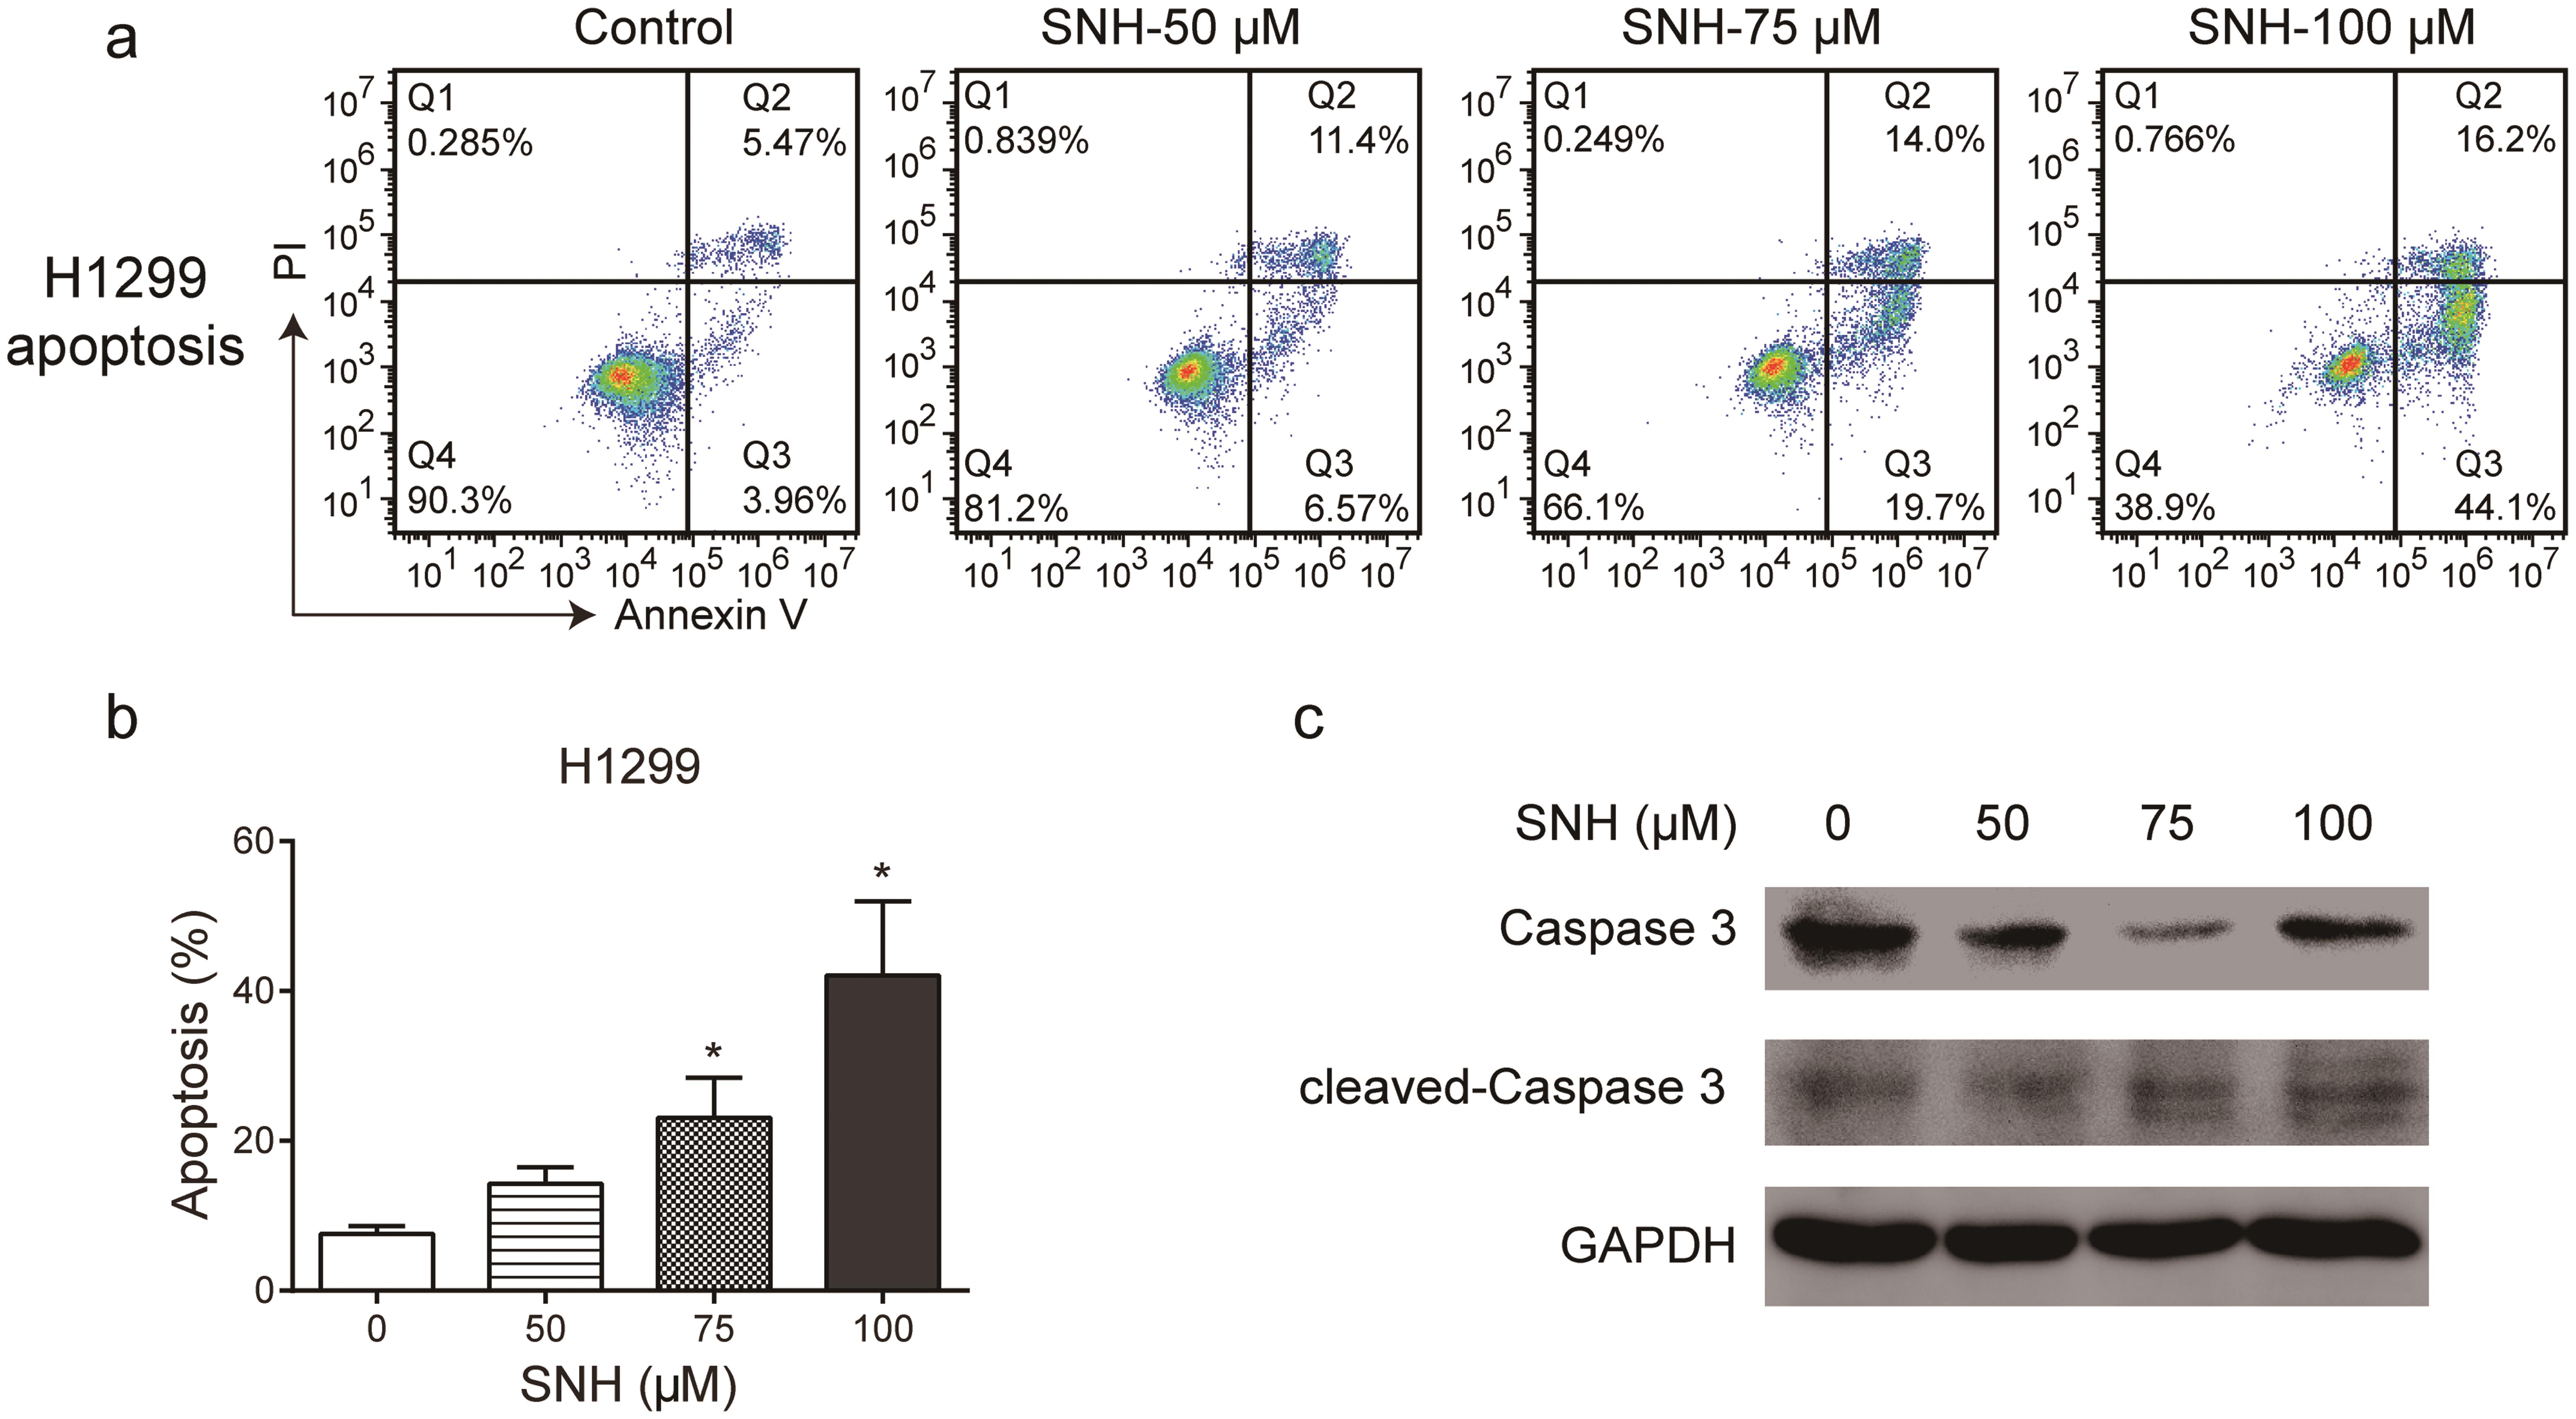 SNH induces the apoptosis of H1299 cells: (a) SNH induces the apoptosis of H1299 cells in a dose-dependent manner. Cells were double-stained with Annexin V and PI; Q1 represents necrotic cells, Q2 represents late apoptotic cells, Q3 represents early apoptotic cells, and Q4 represents normal cells; (b) quantitative analysis of SNH-induced apoptotic cells (Q2 + Q3). Data are representative of three independent experiments, *<italic>p</italic><0.05, and (c) SNH significantly increased the expression level of cleaved caspase-3 in H1299 cells.